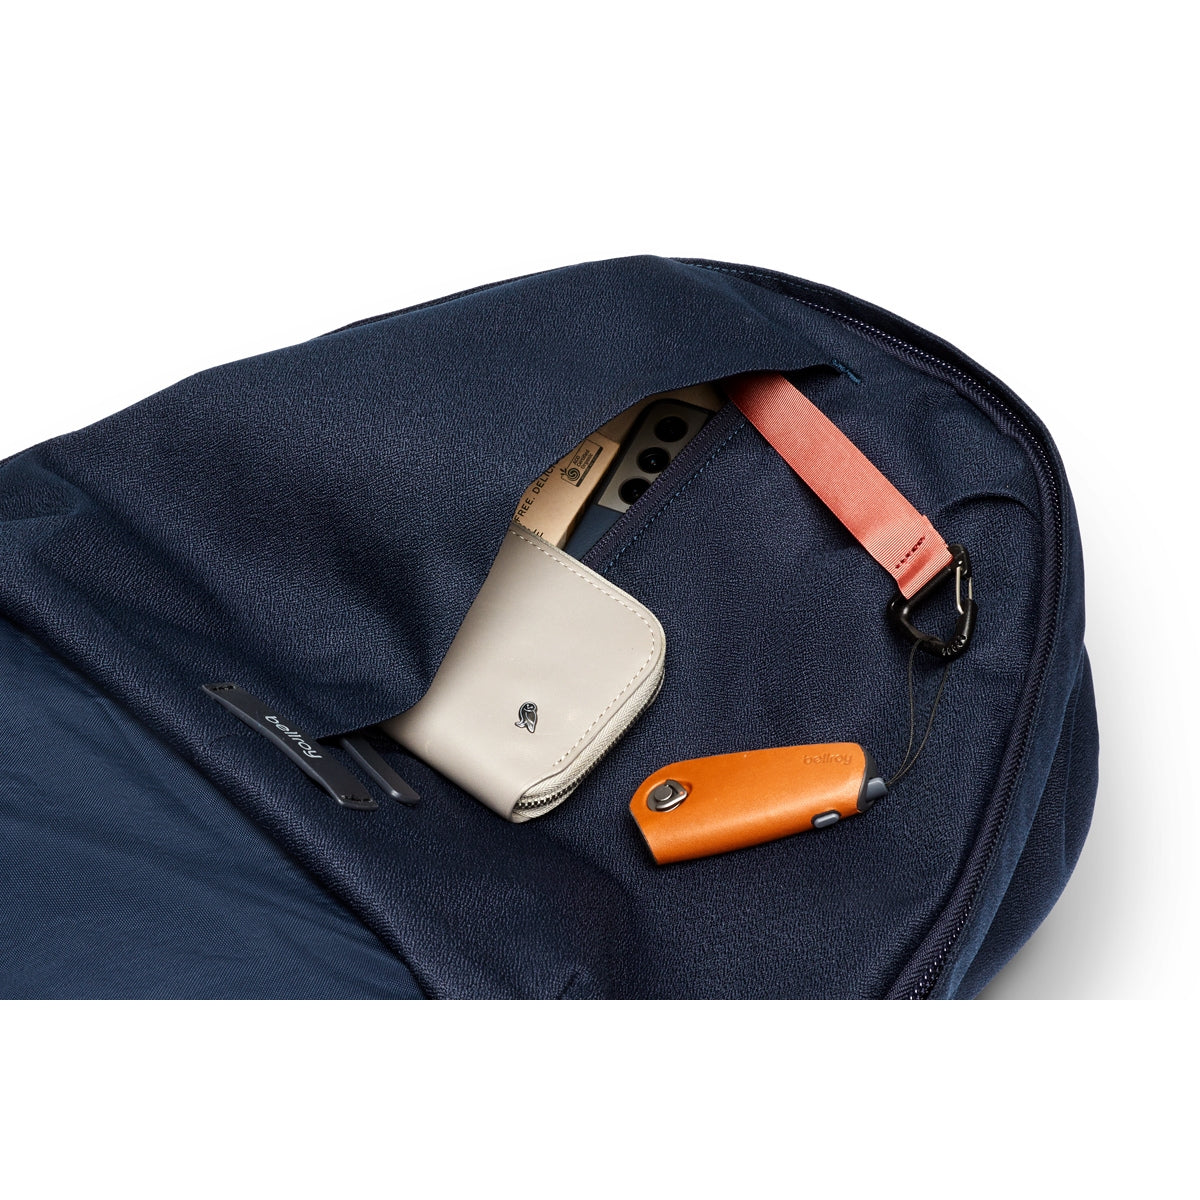 Bellroy Classic Backpack Plus in Navy